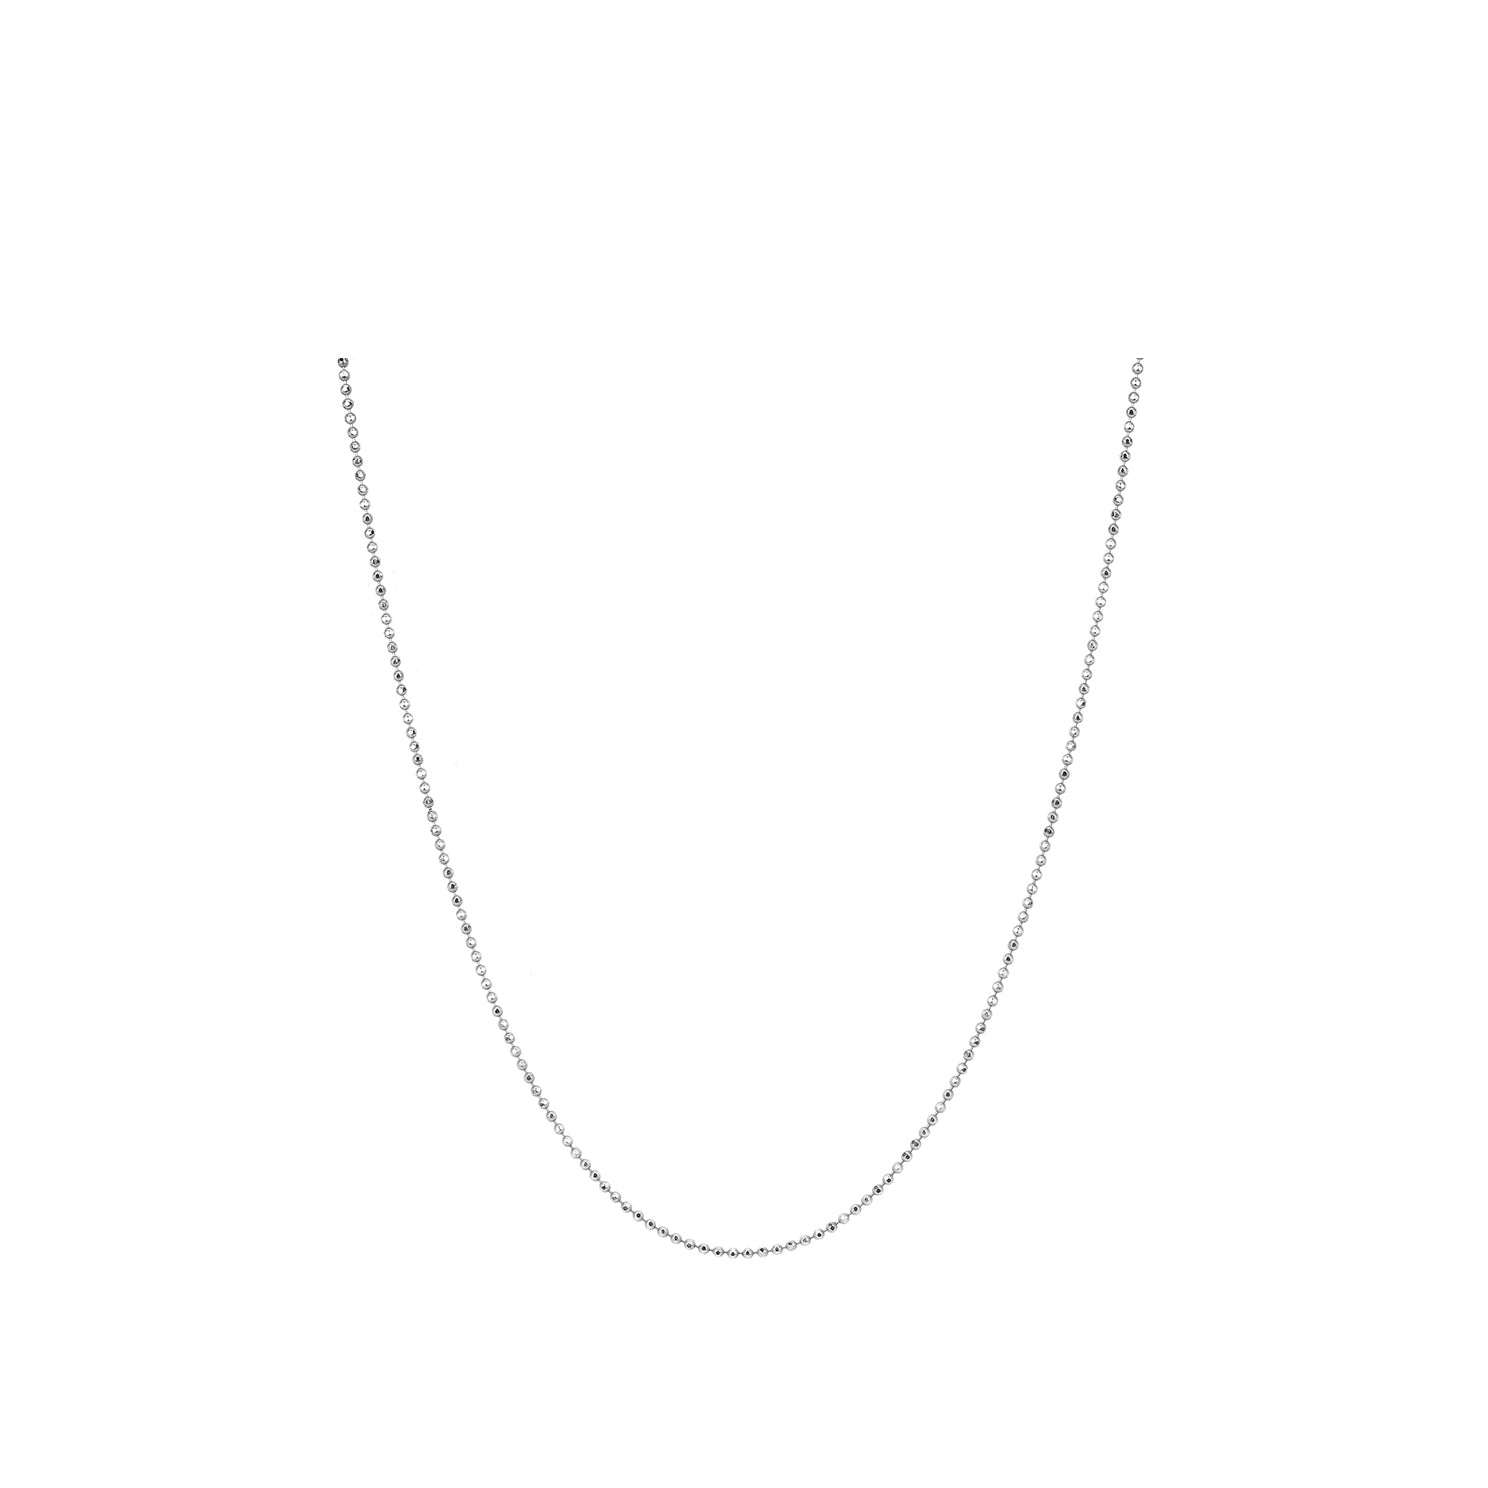 Gold Faceted Ball Chain in 14k white gold